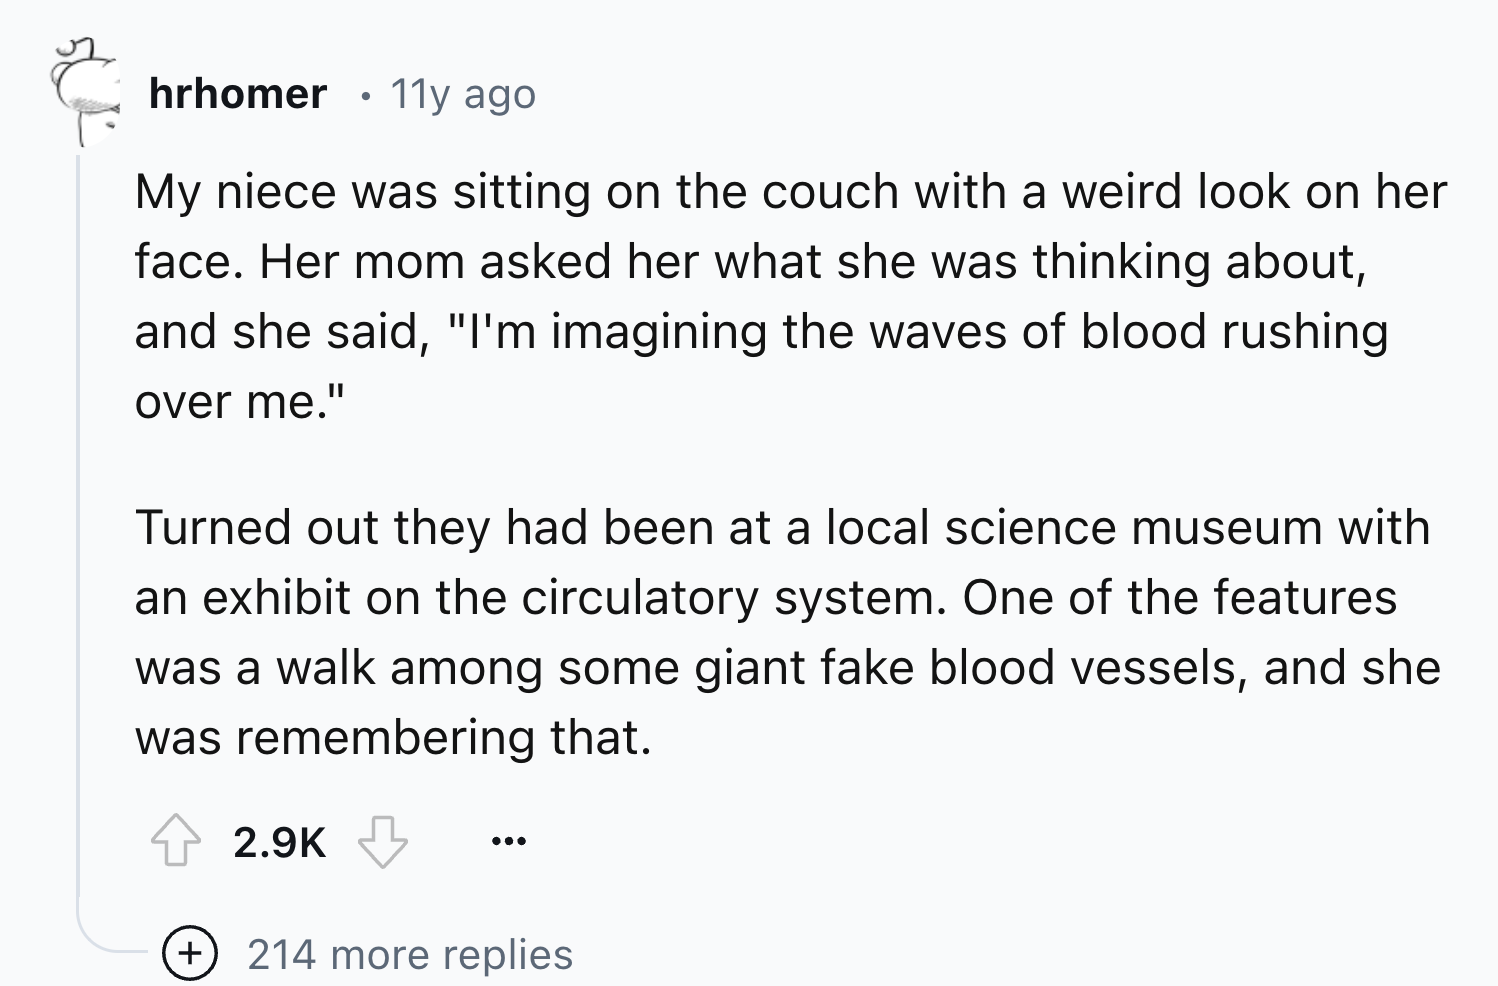 number - 50% hrhomer 11y ago My niece was sitting on the couch with a weird look on her face. Her mom asked her what she was thinking about, and she said, "I'm imagining the waves of blood rushing over me." Turned out they had been at a local science muse